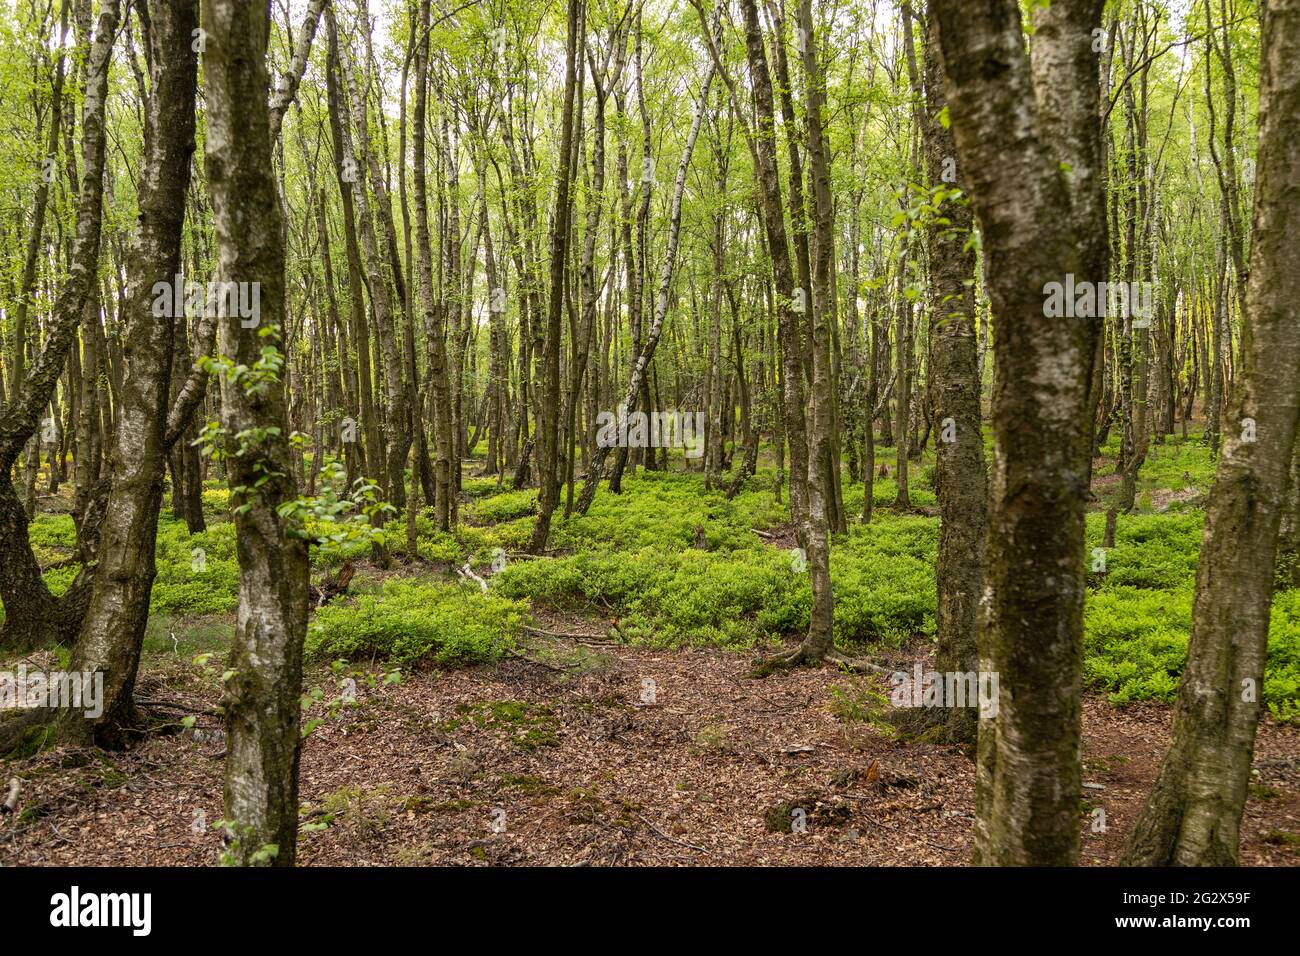 Mystic forest in the Todtenbruch Moor in the Raffelsbrand region in the Eifel region with birch and beech trees Stock Photo